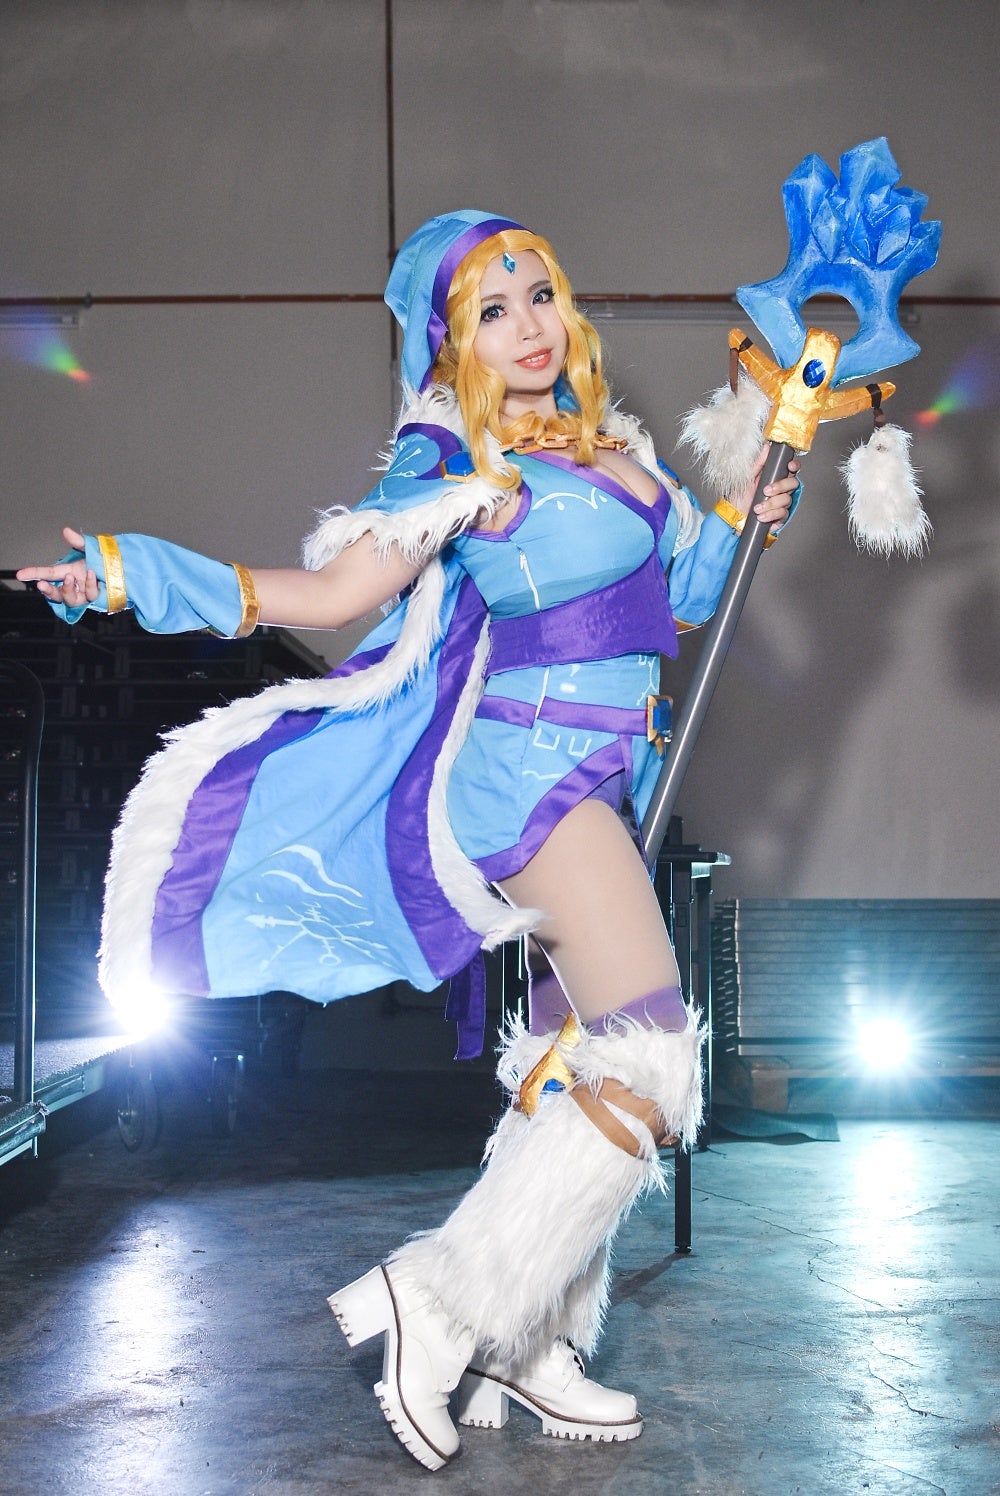 Micho as Crystal Maiden from Dota 2 photo by Kok Choong